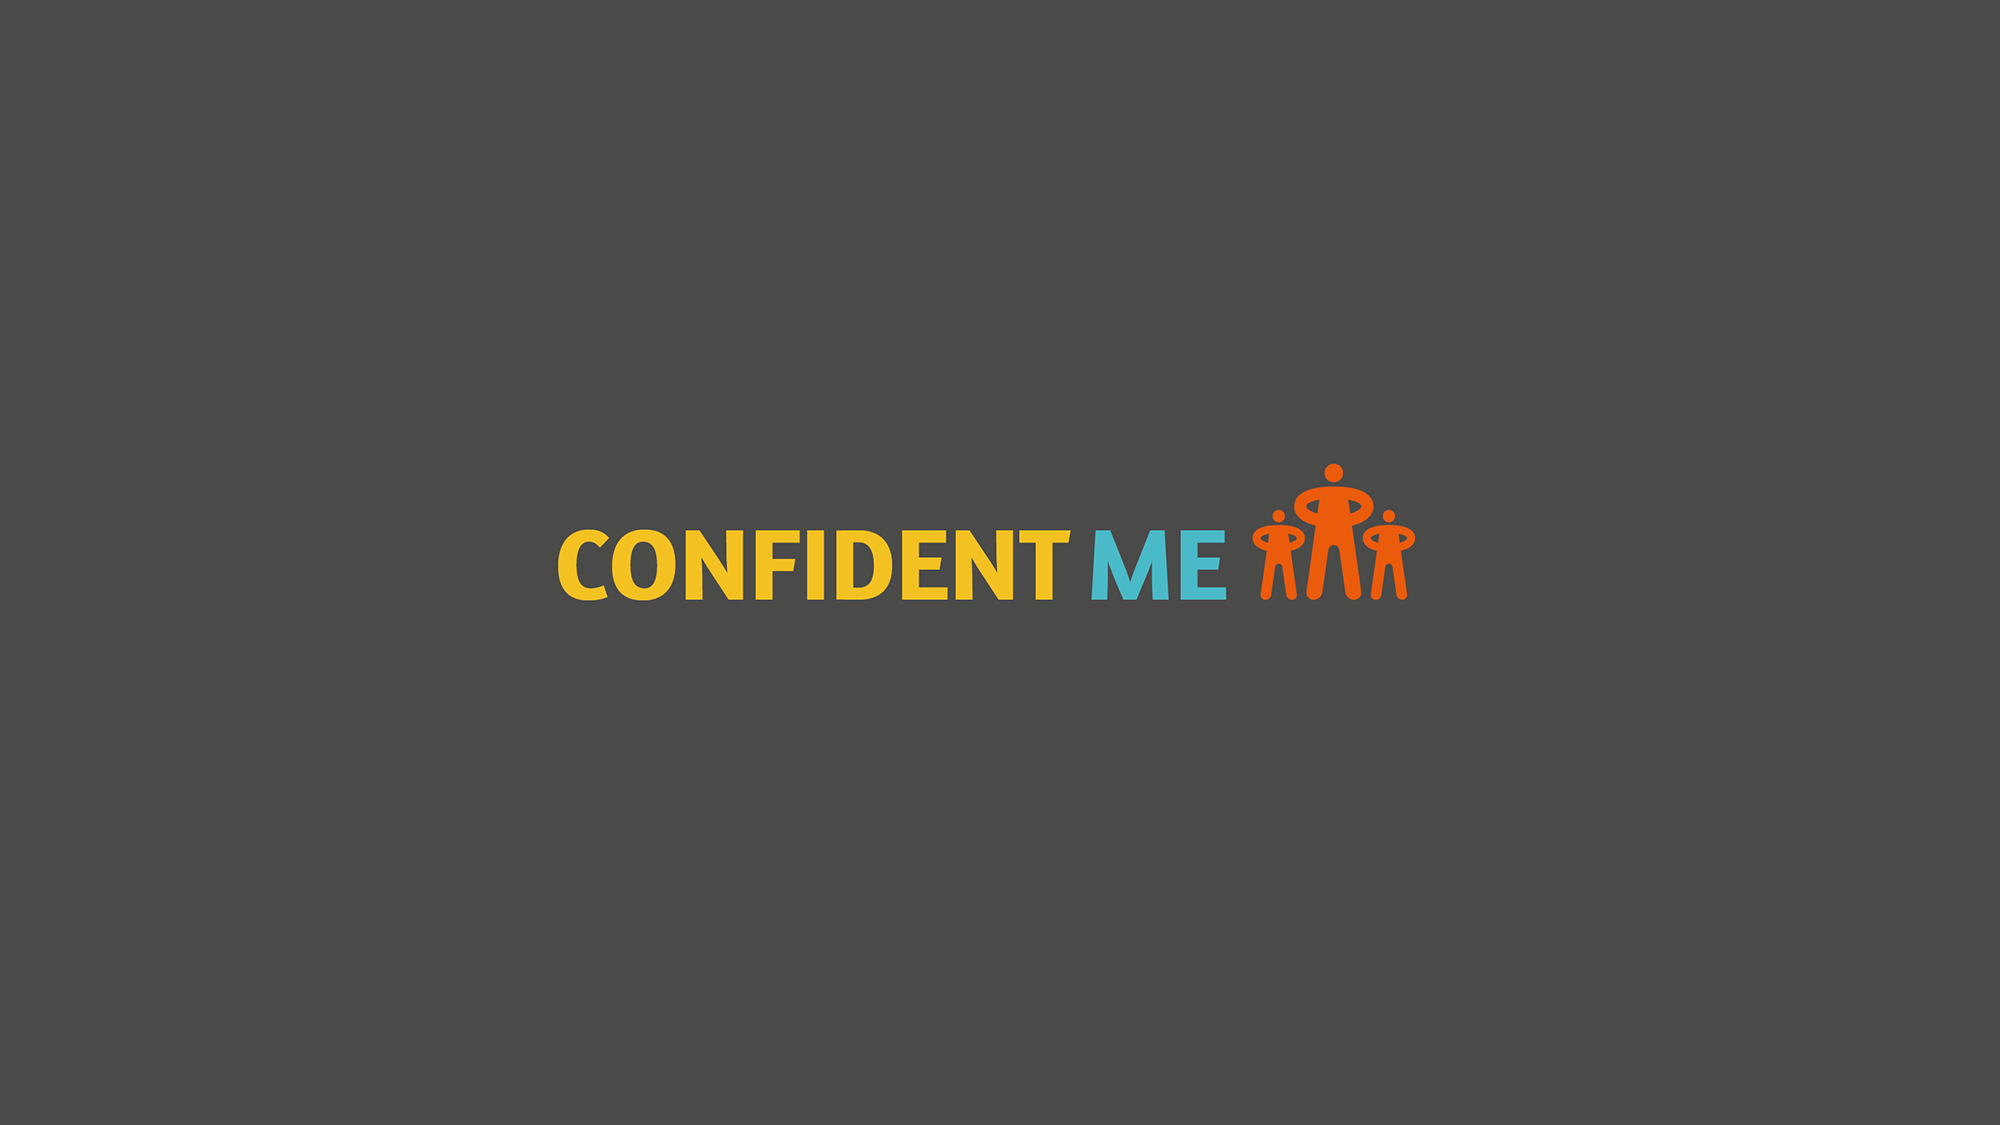 ConfidentME Week – How to get a job using LinkedIn